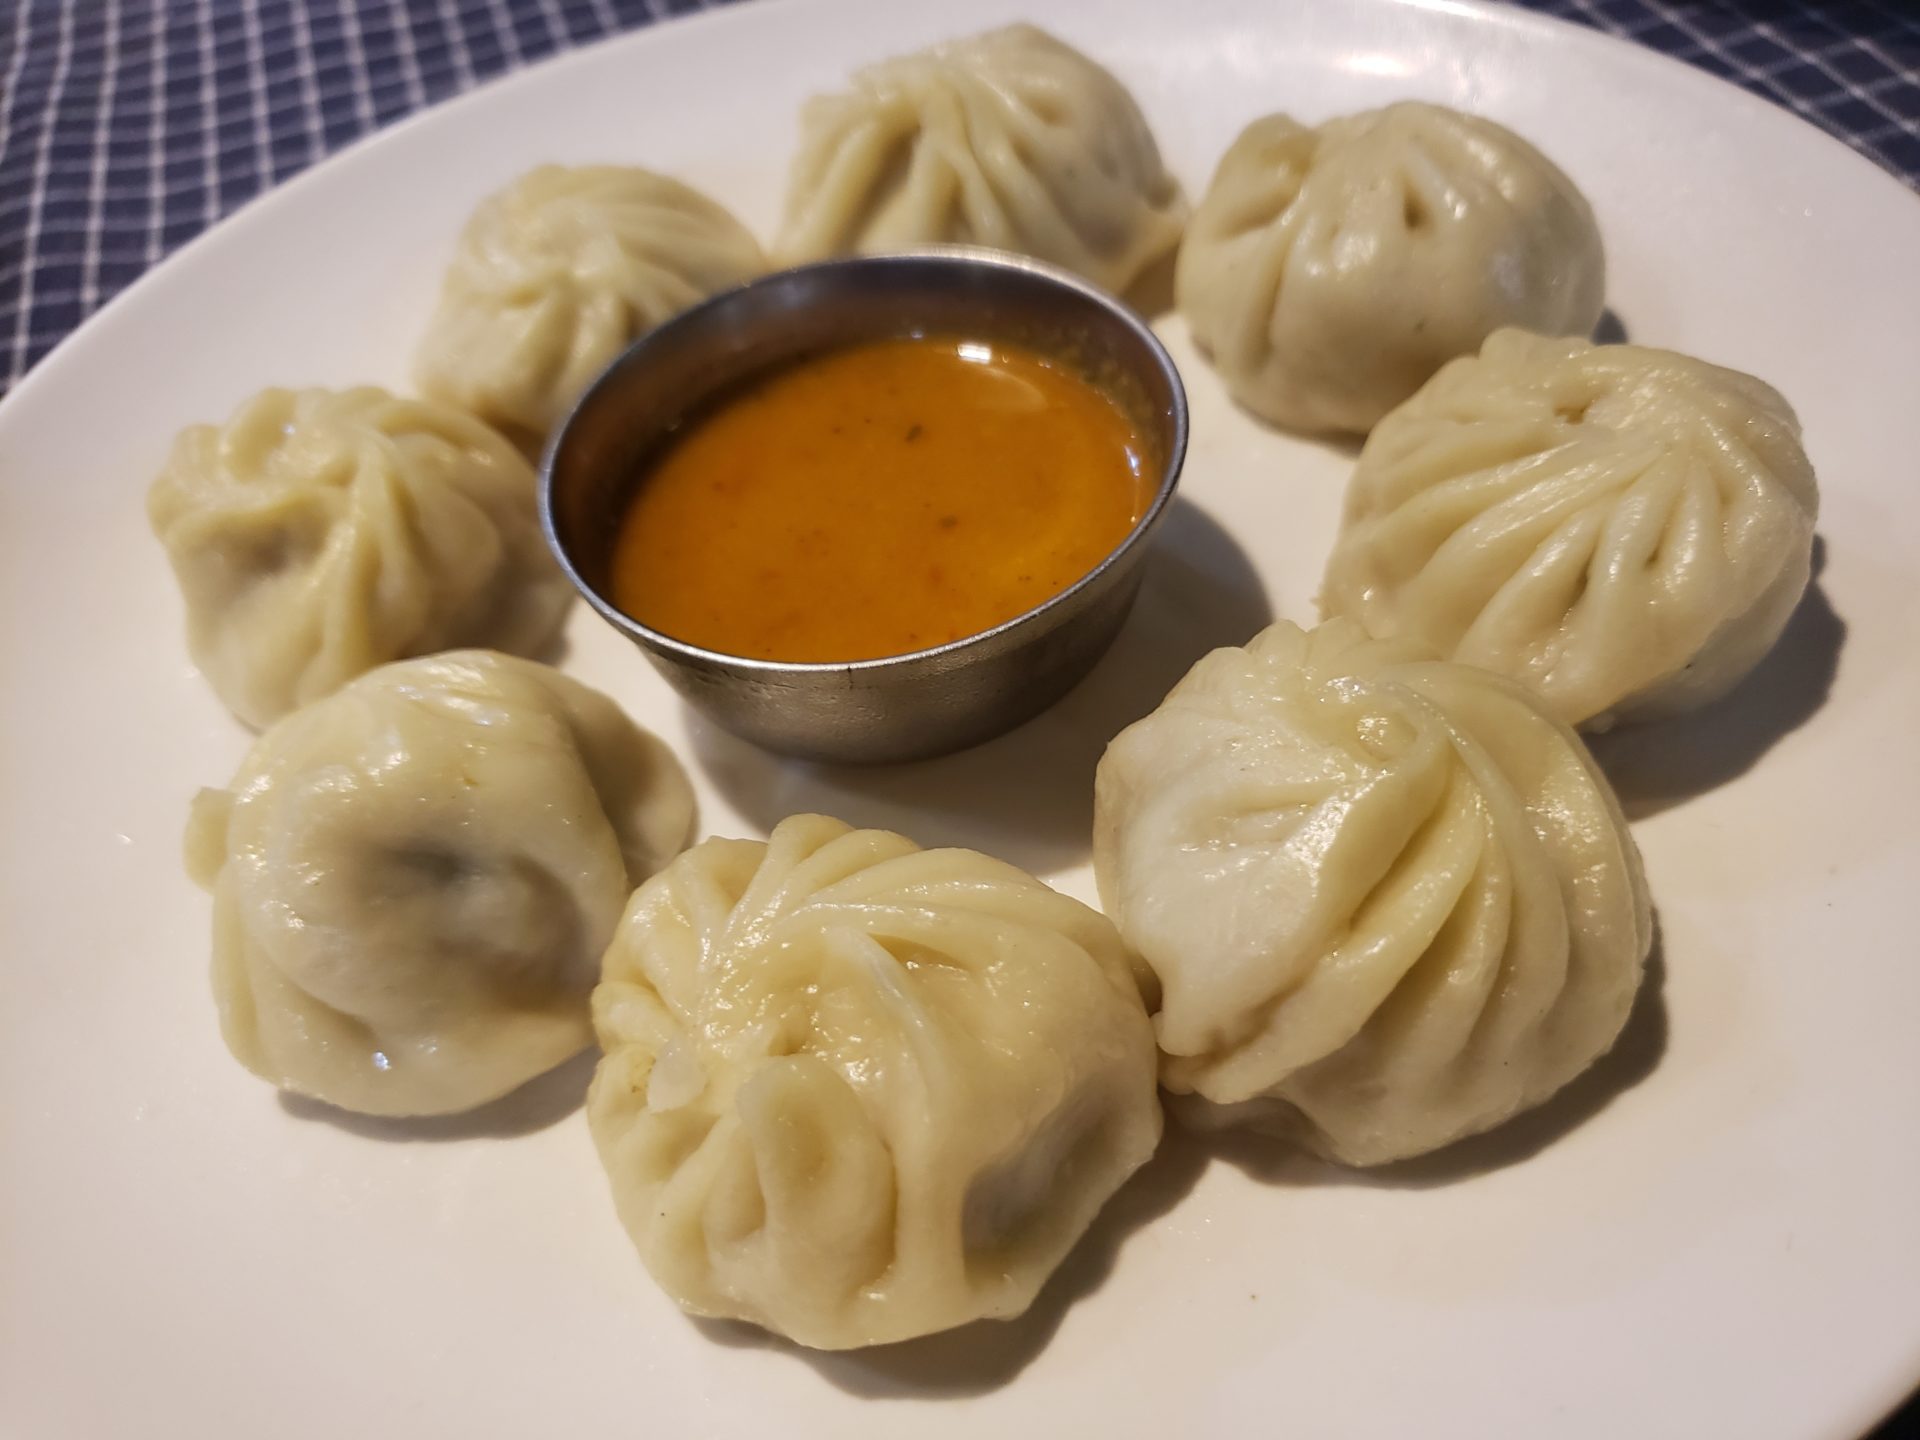 a plate of dumplings with a small cup of sauce